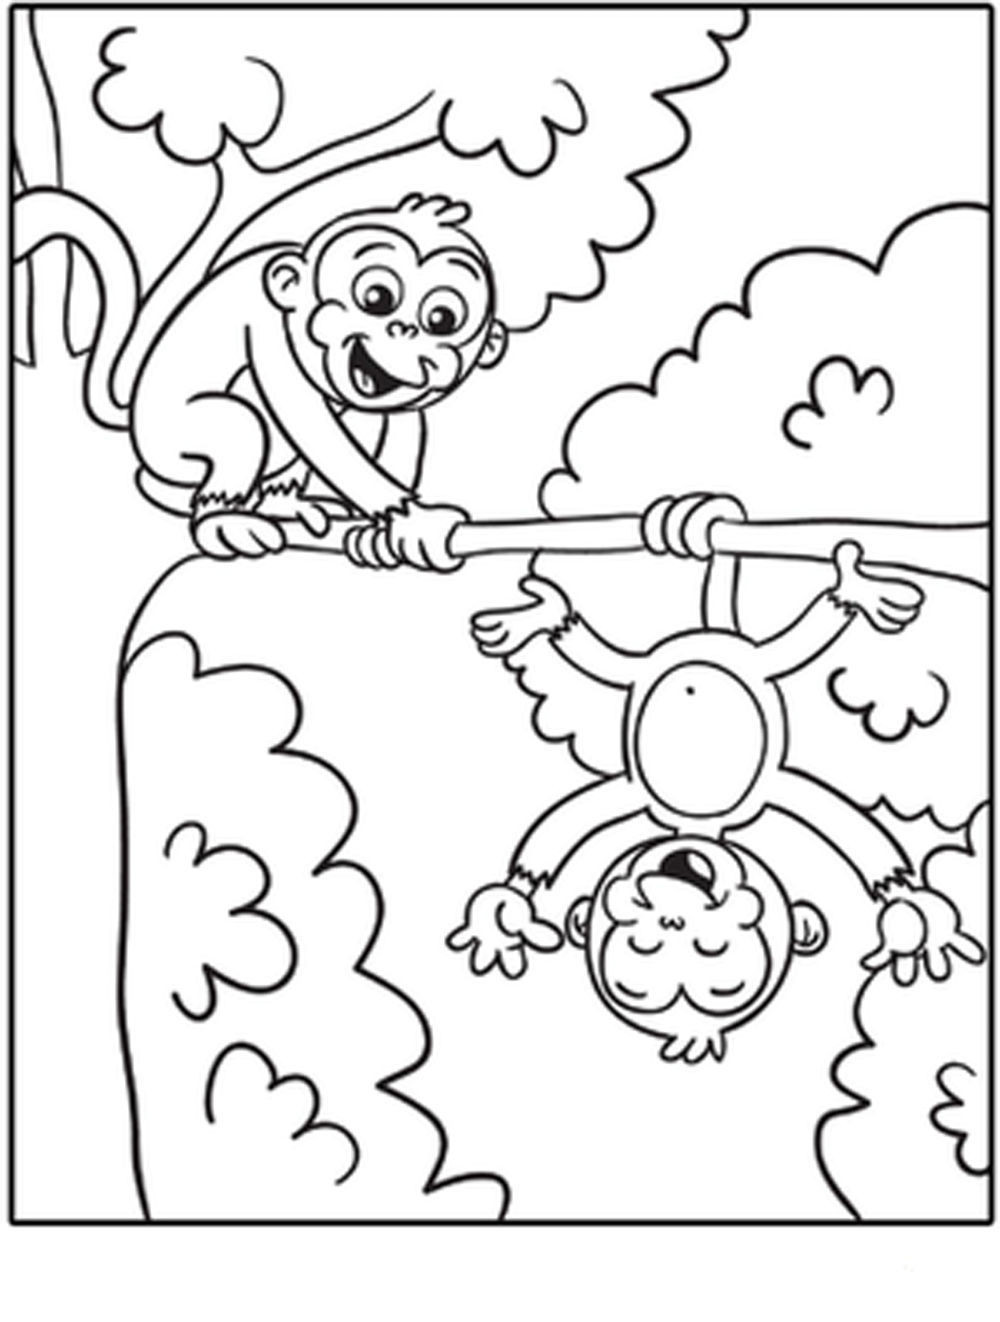 Free Preschool Coloring Sheets Of Monkeys
 Print & Download Coloring Monkey Head with Monkey